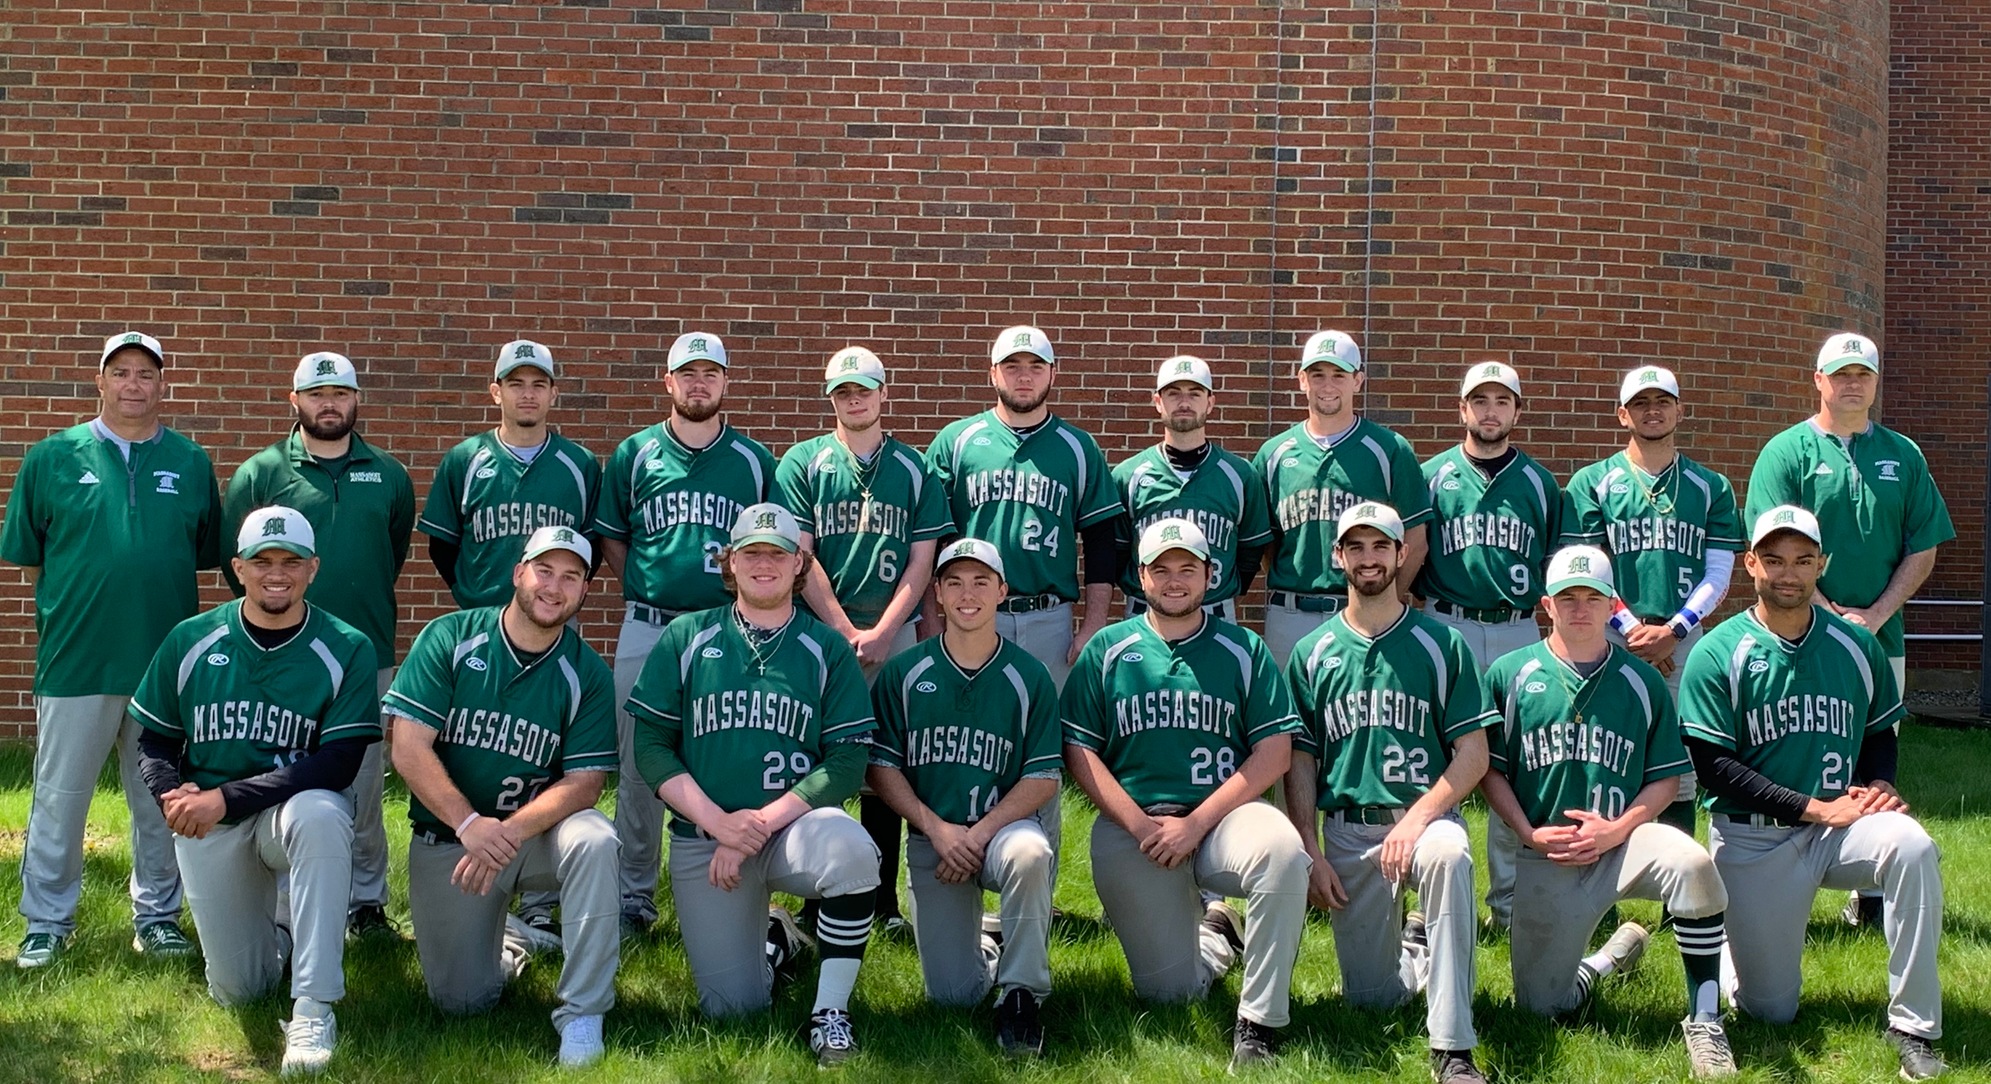 Baseball Faces Top-Seed CCRI in Region 21 Tourney, Thursday